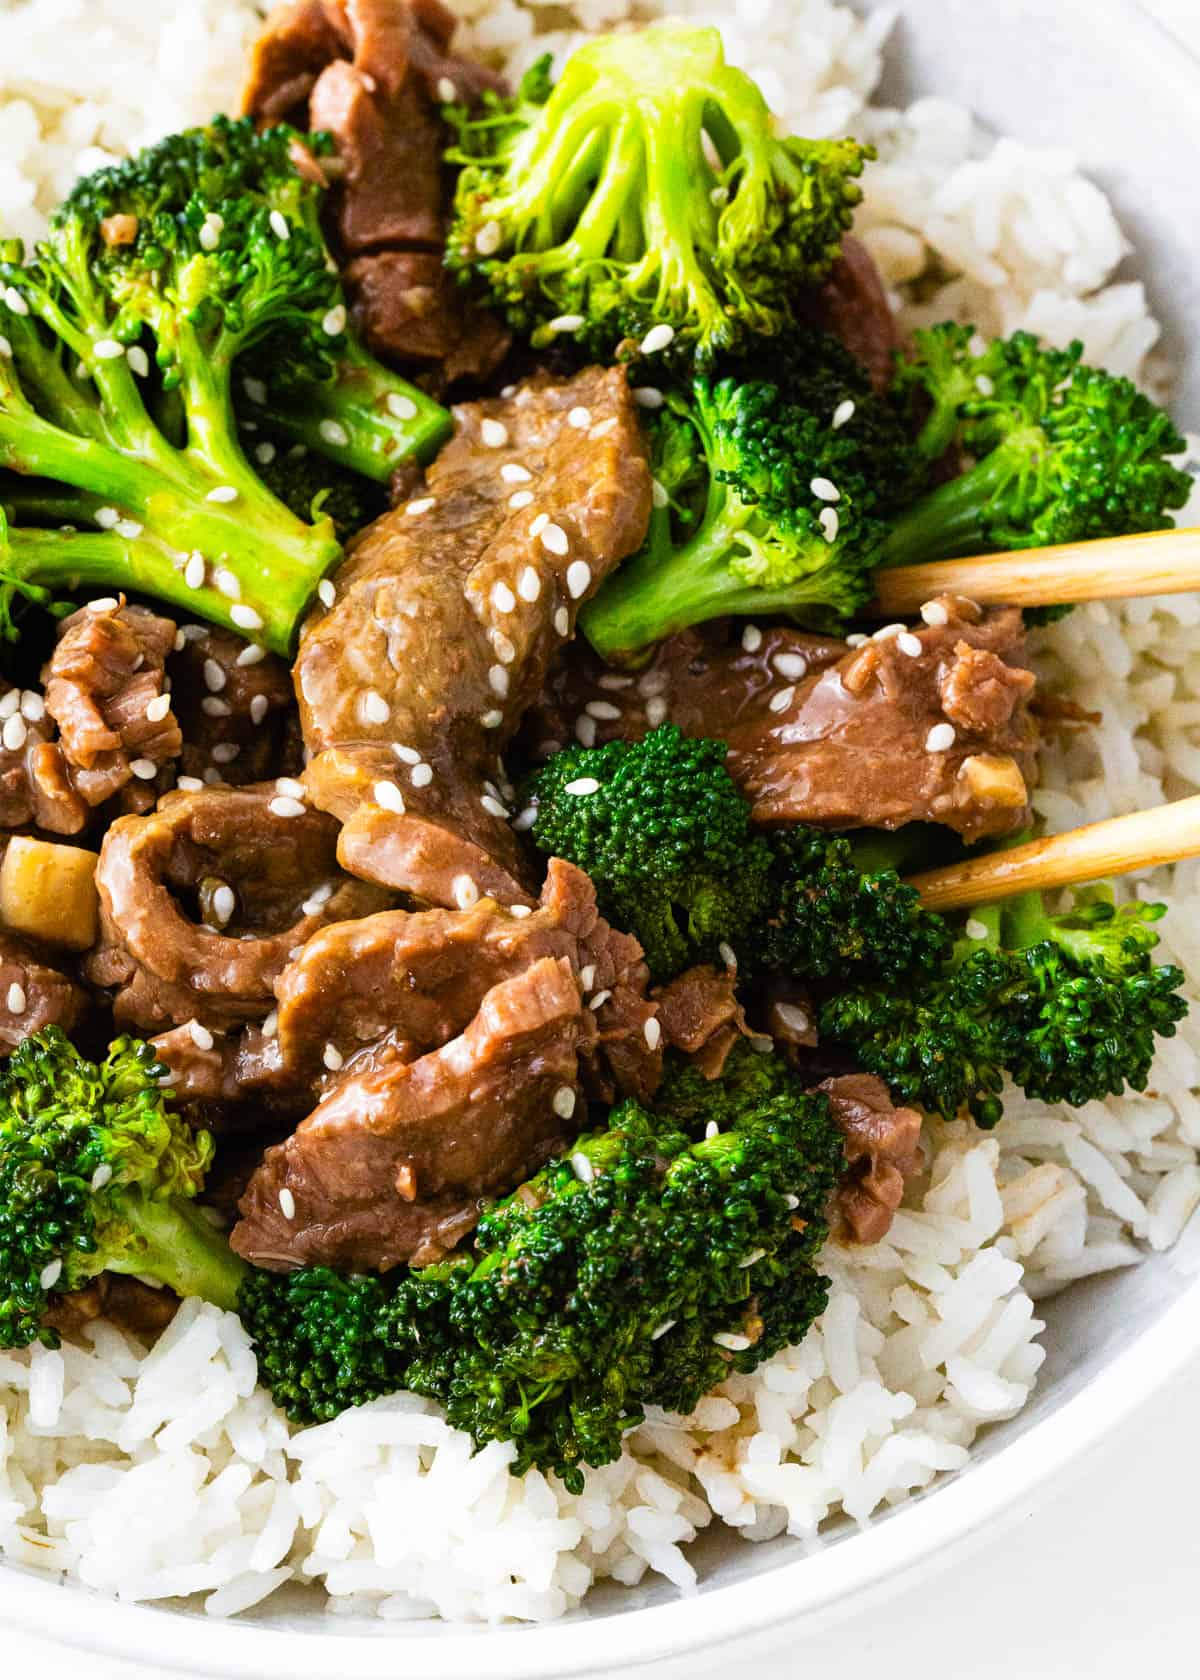 Beef and broccoli served over rice.